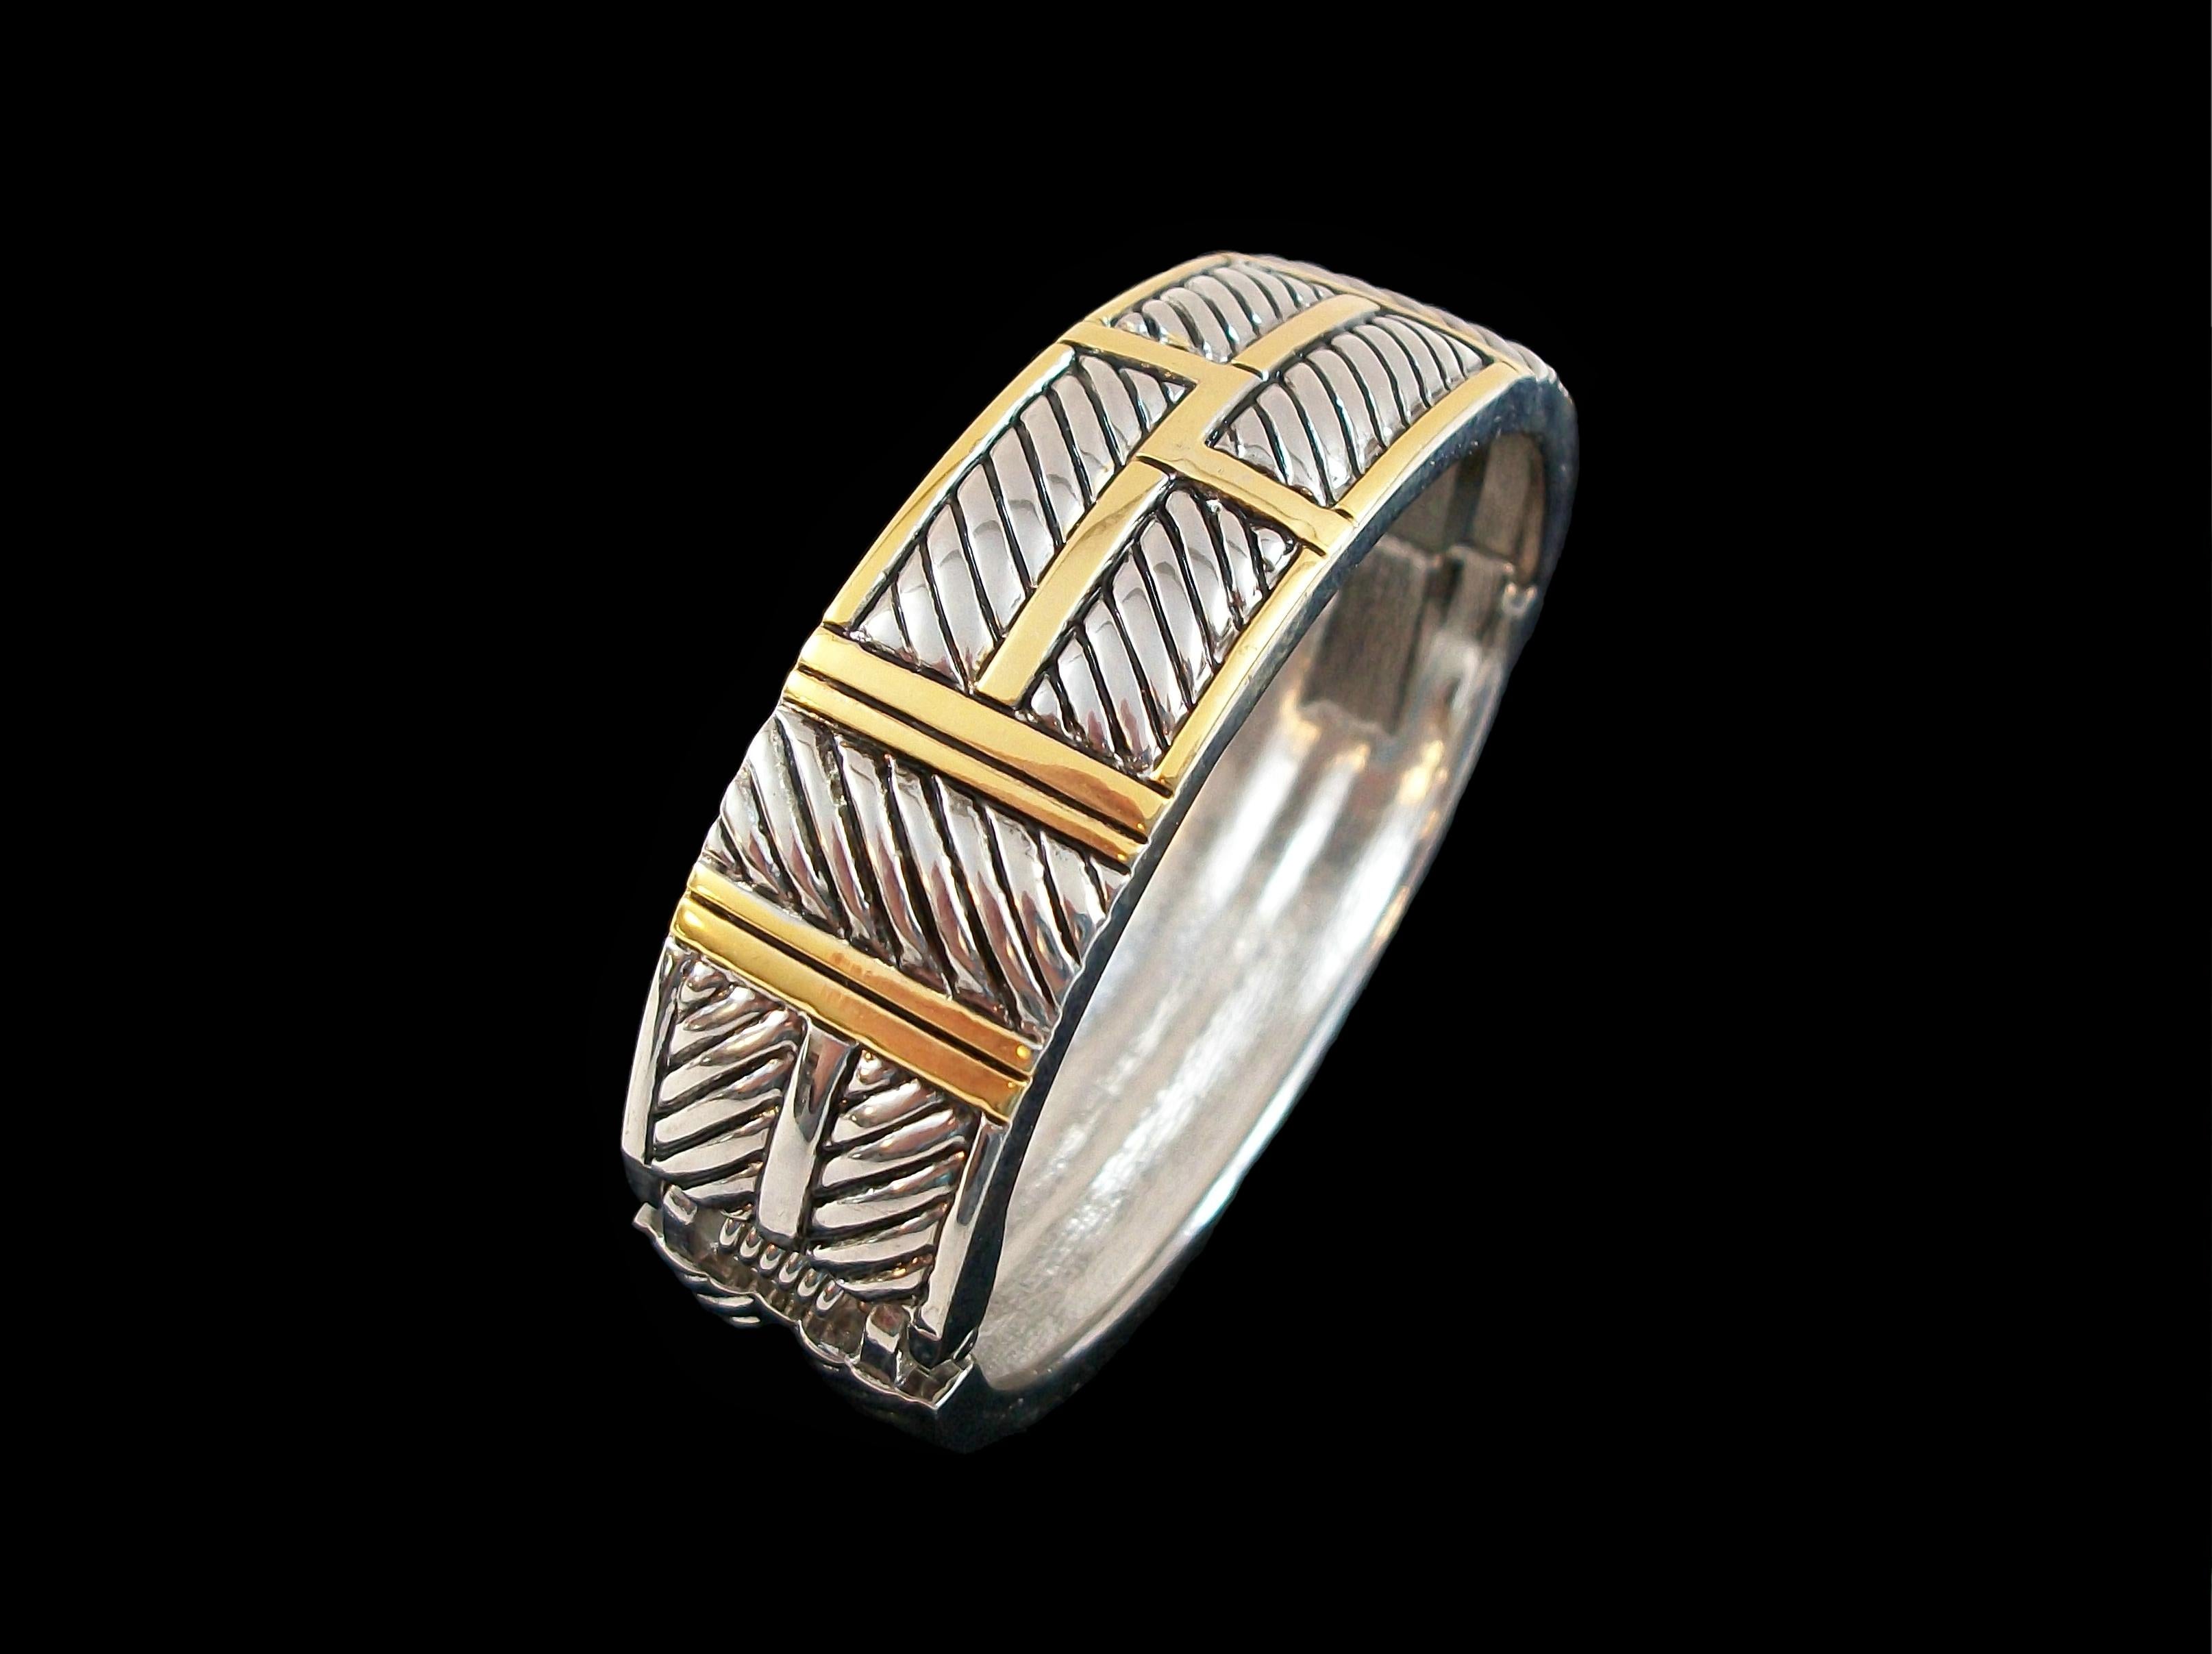 Retro Vintage Hinged Two Tone Metal Clamper Bangle Bracelet - Unsigned - Circa 1980's For Sale